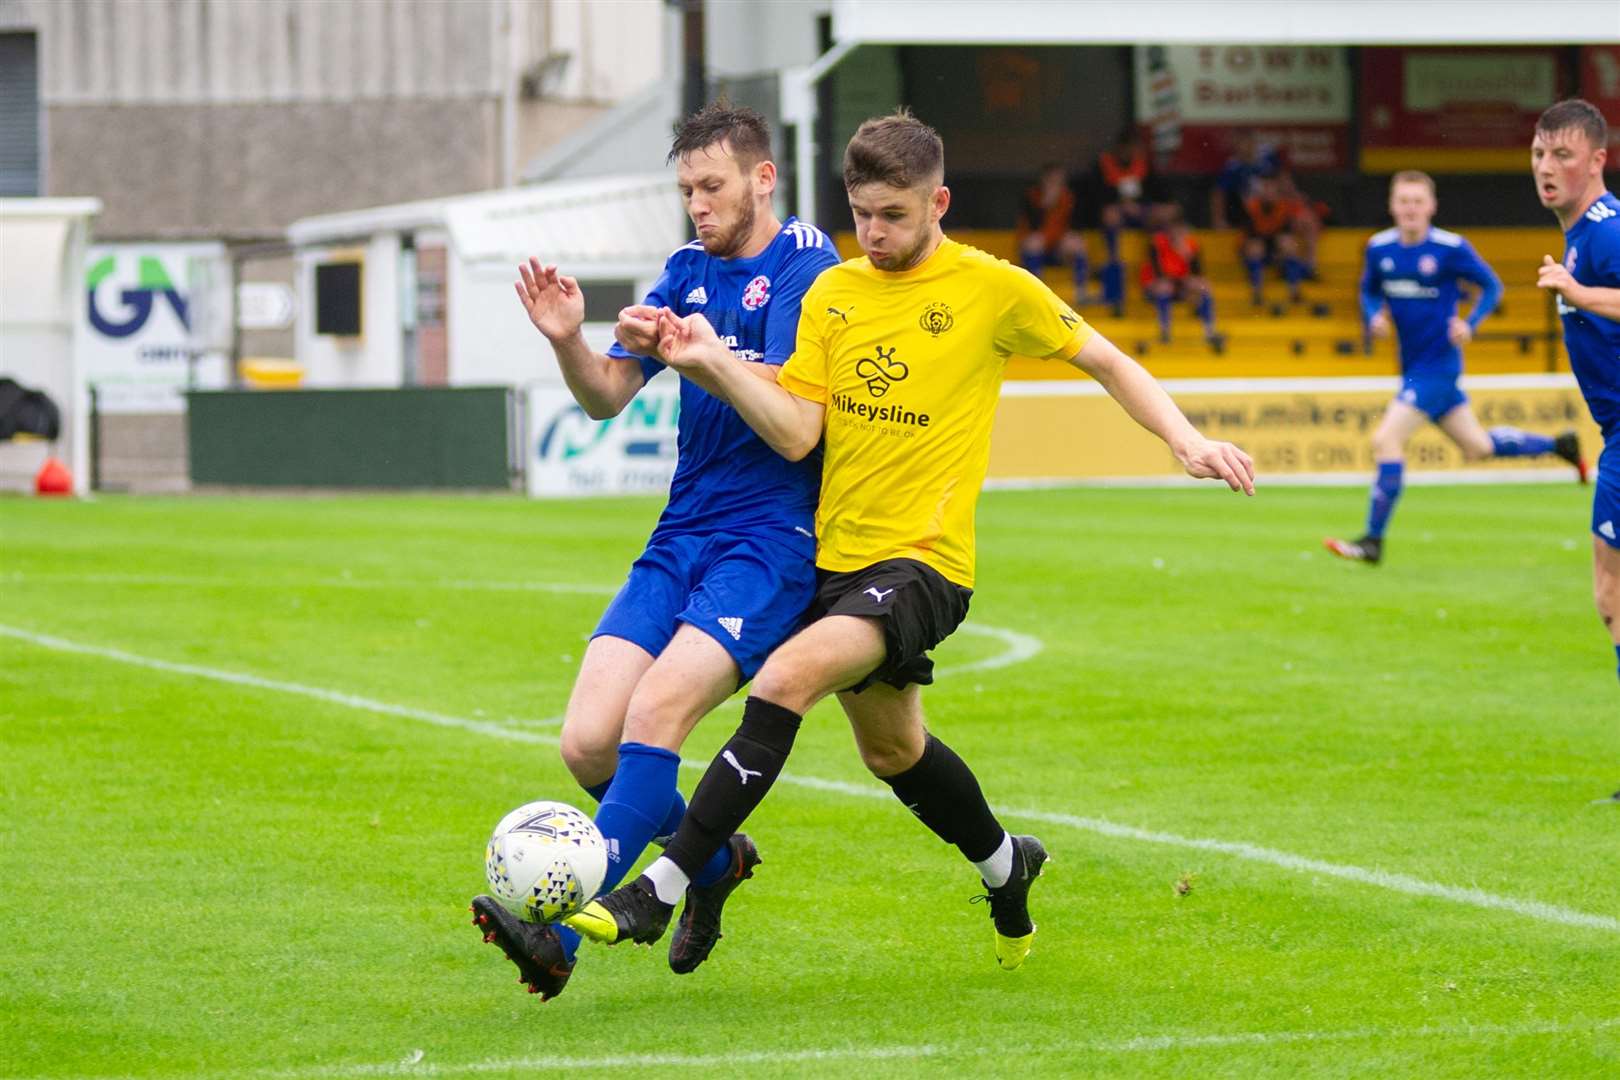 Nairn County's Dylan MacKenzie and Lossiemouth centre back Dean Stewart chase down the ball. ..Nairn County FC (2) vs Lossiemouth FC (4) - North of Scotland Cup first round - Station Park, Nairn 28/07/2021...Picture: Daniel Forsyth..